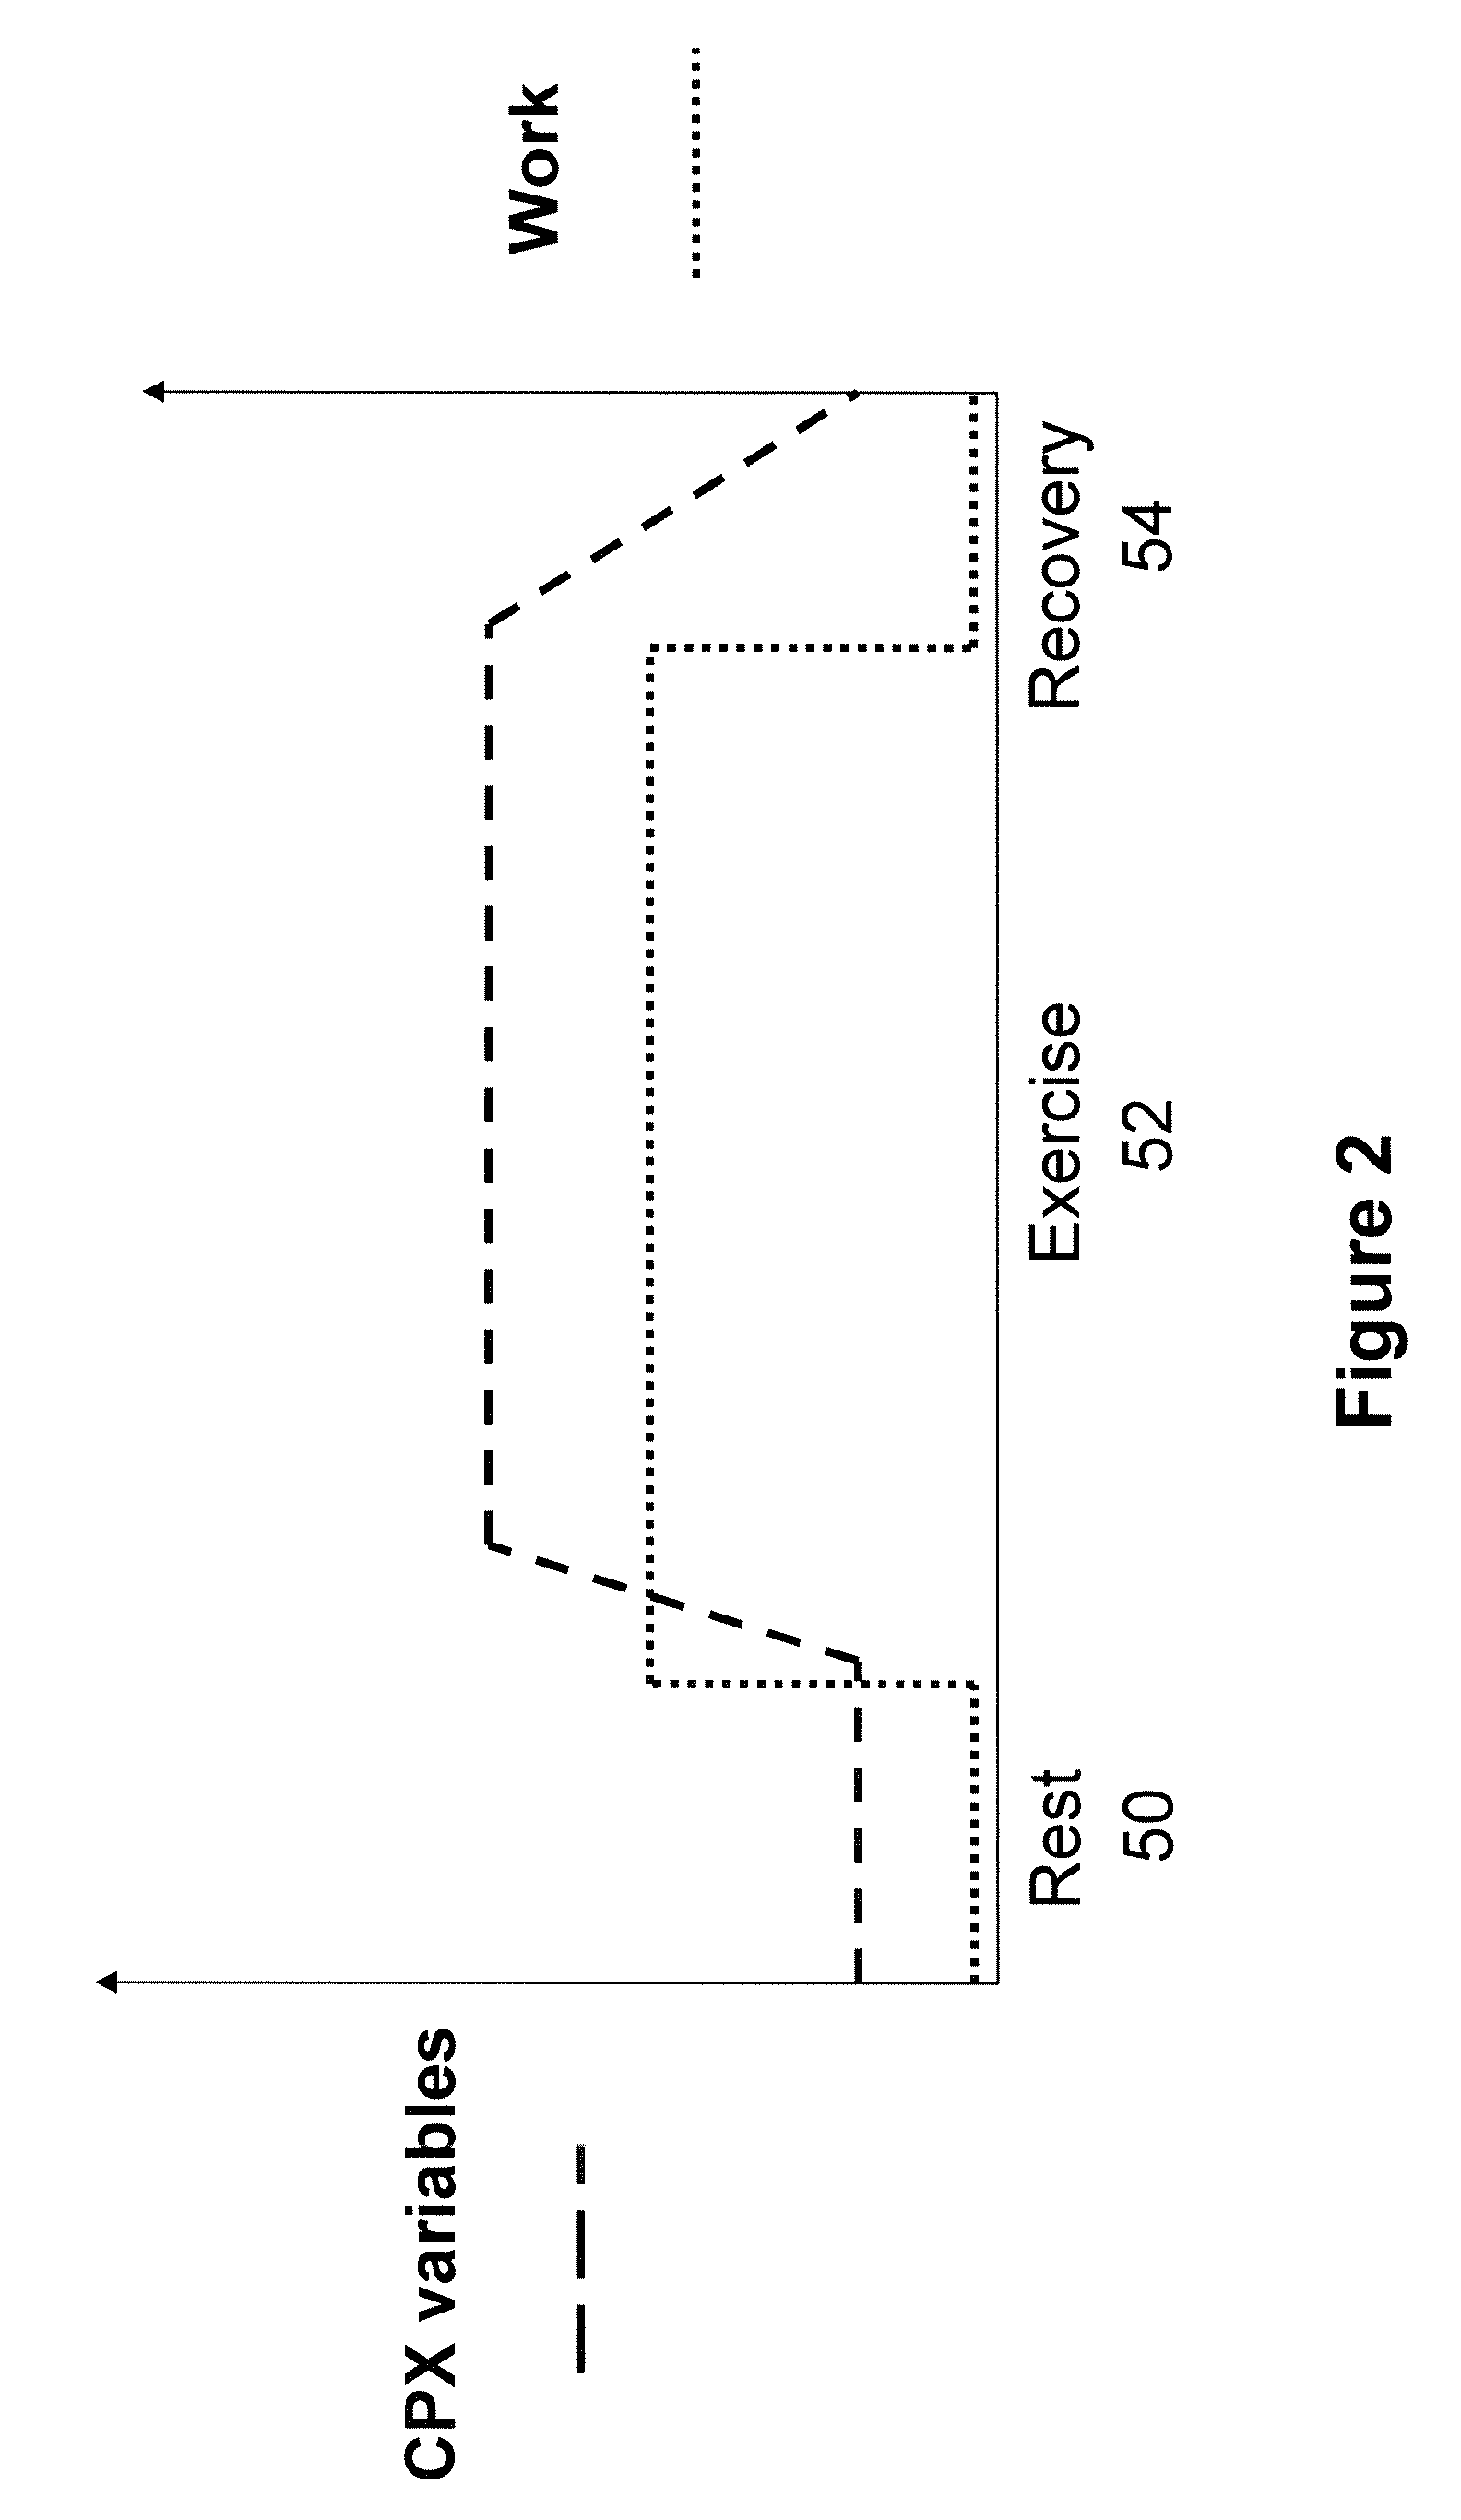 Pattern Recognition System for Classifying the Functional Status of Patients with Chronic Disease